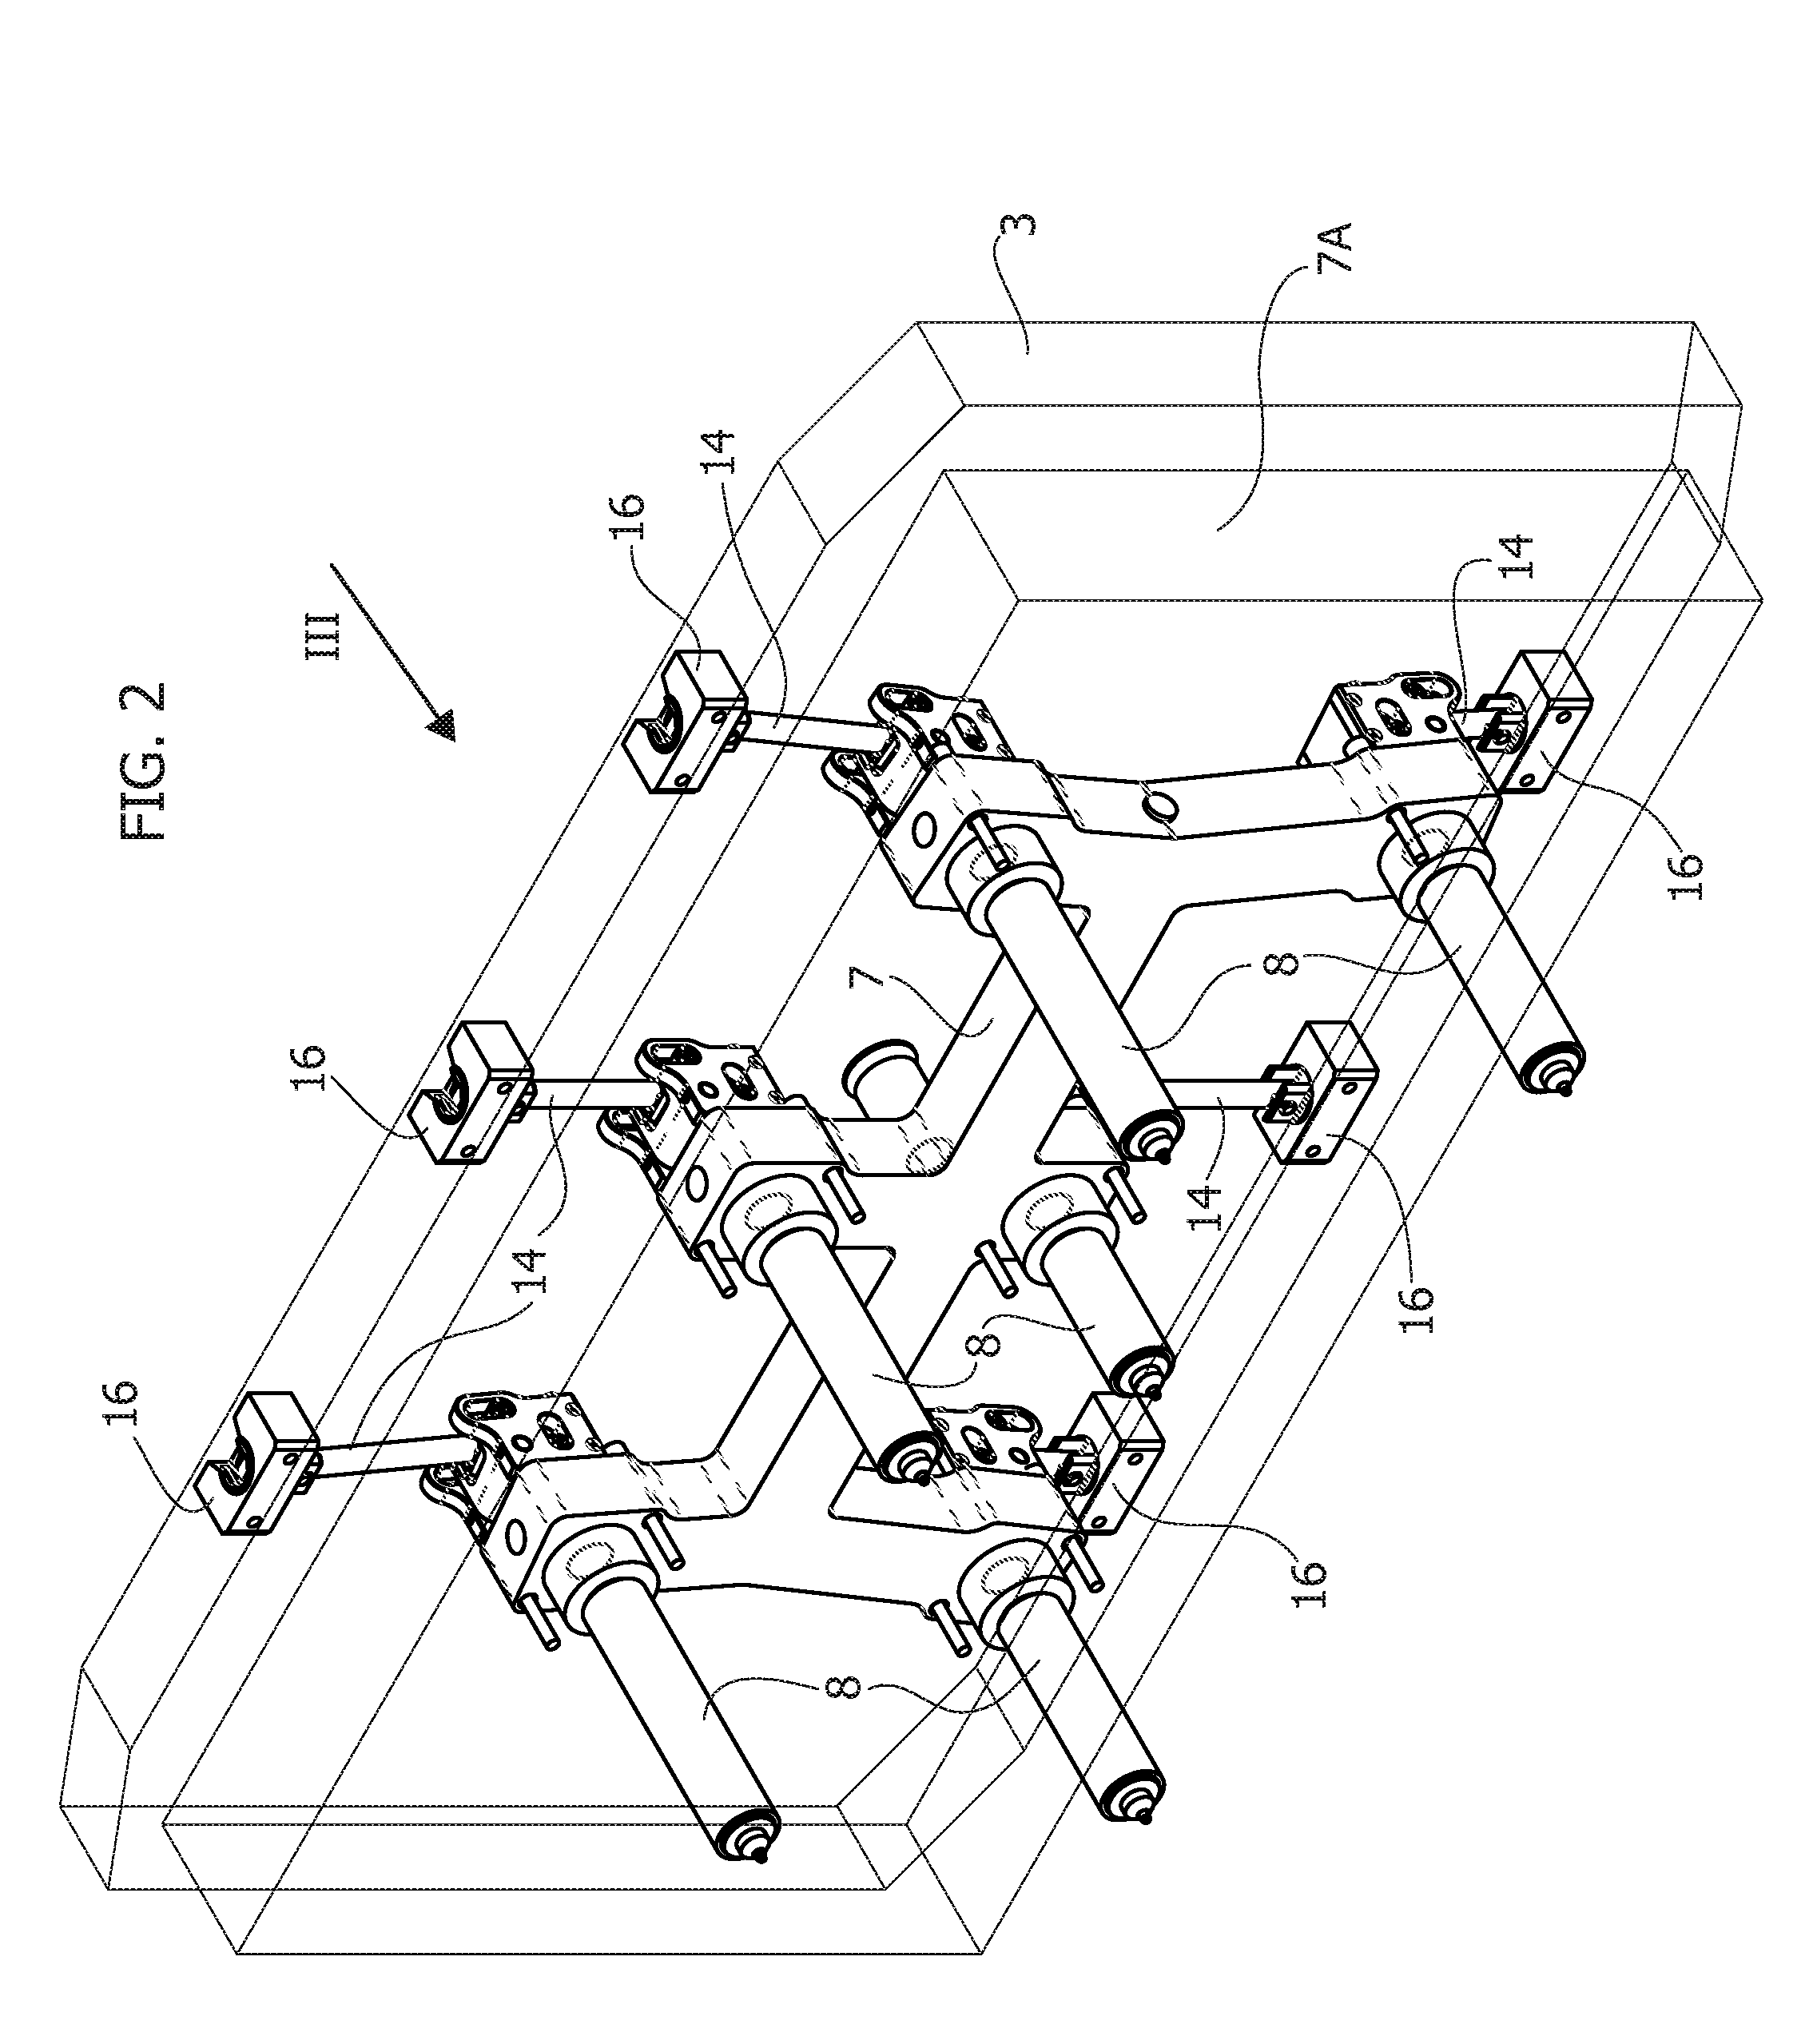 Apparatus for injection molding of plastic material